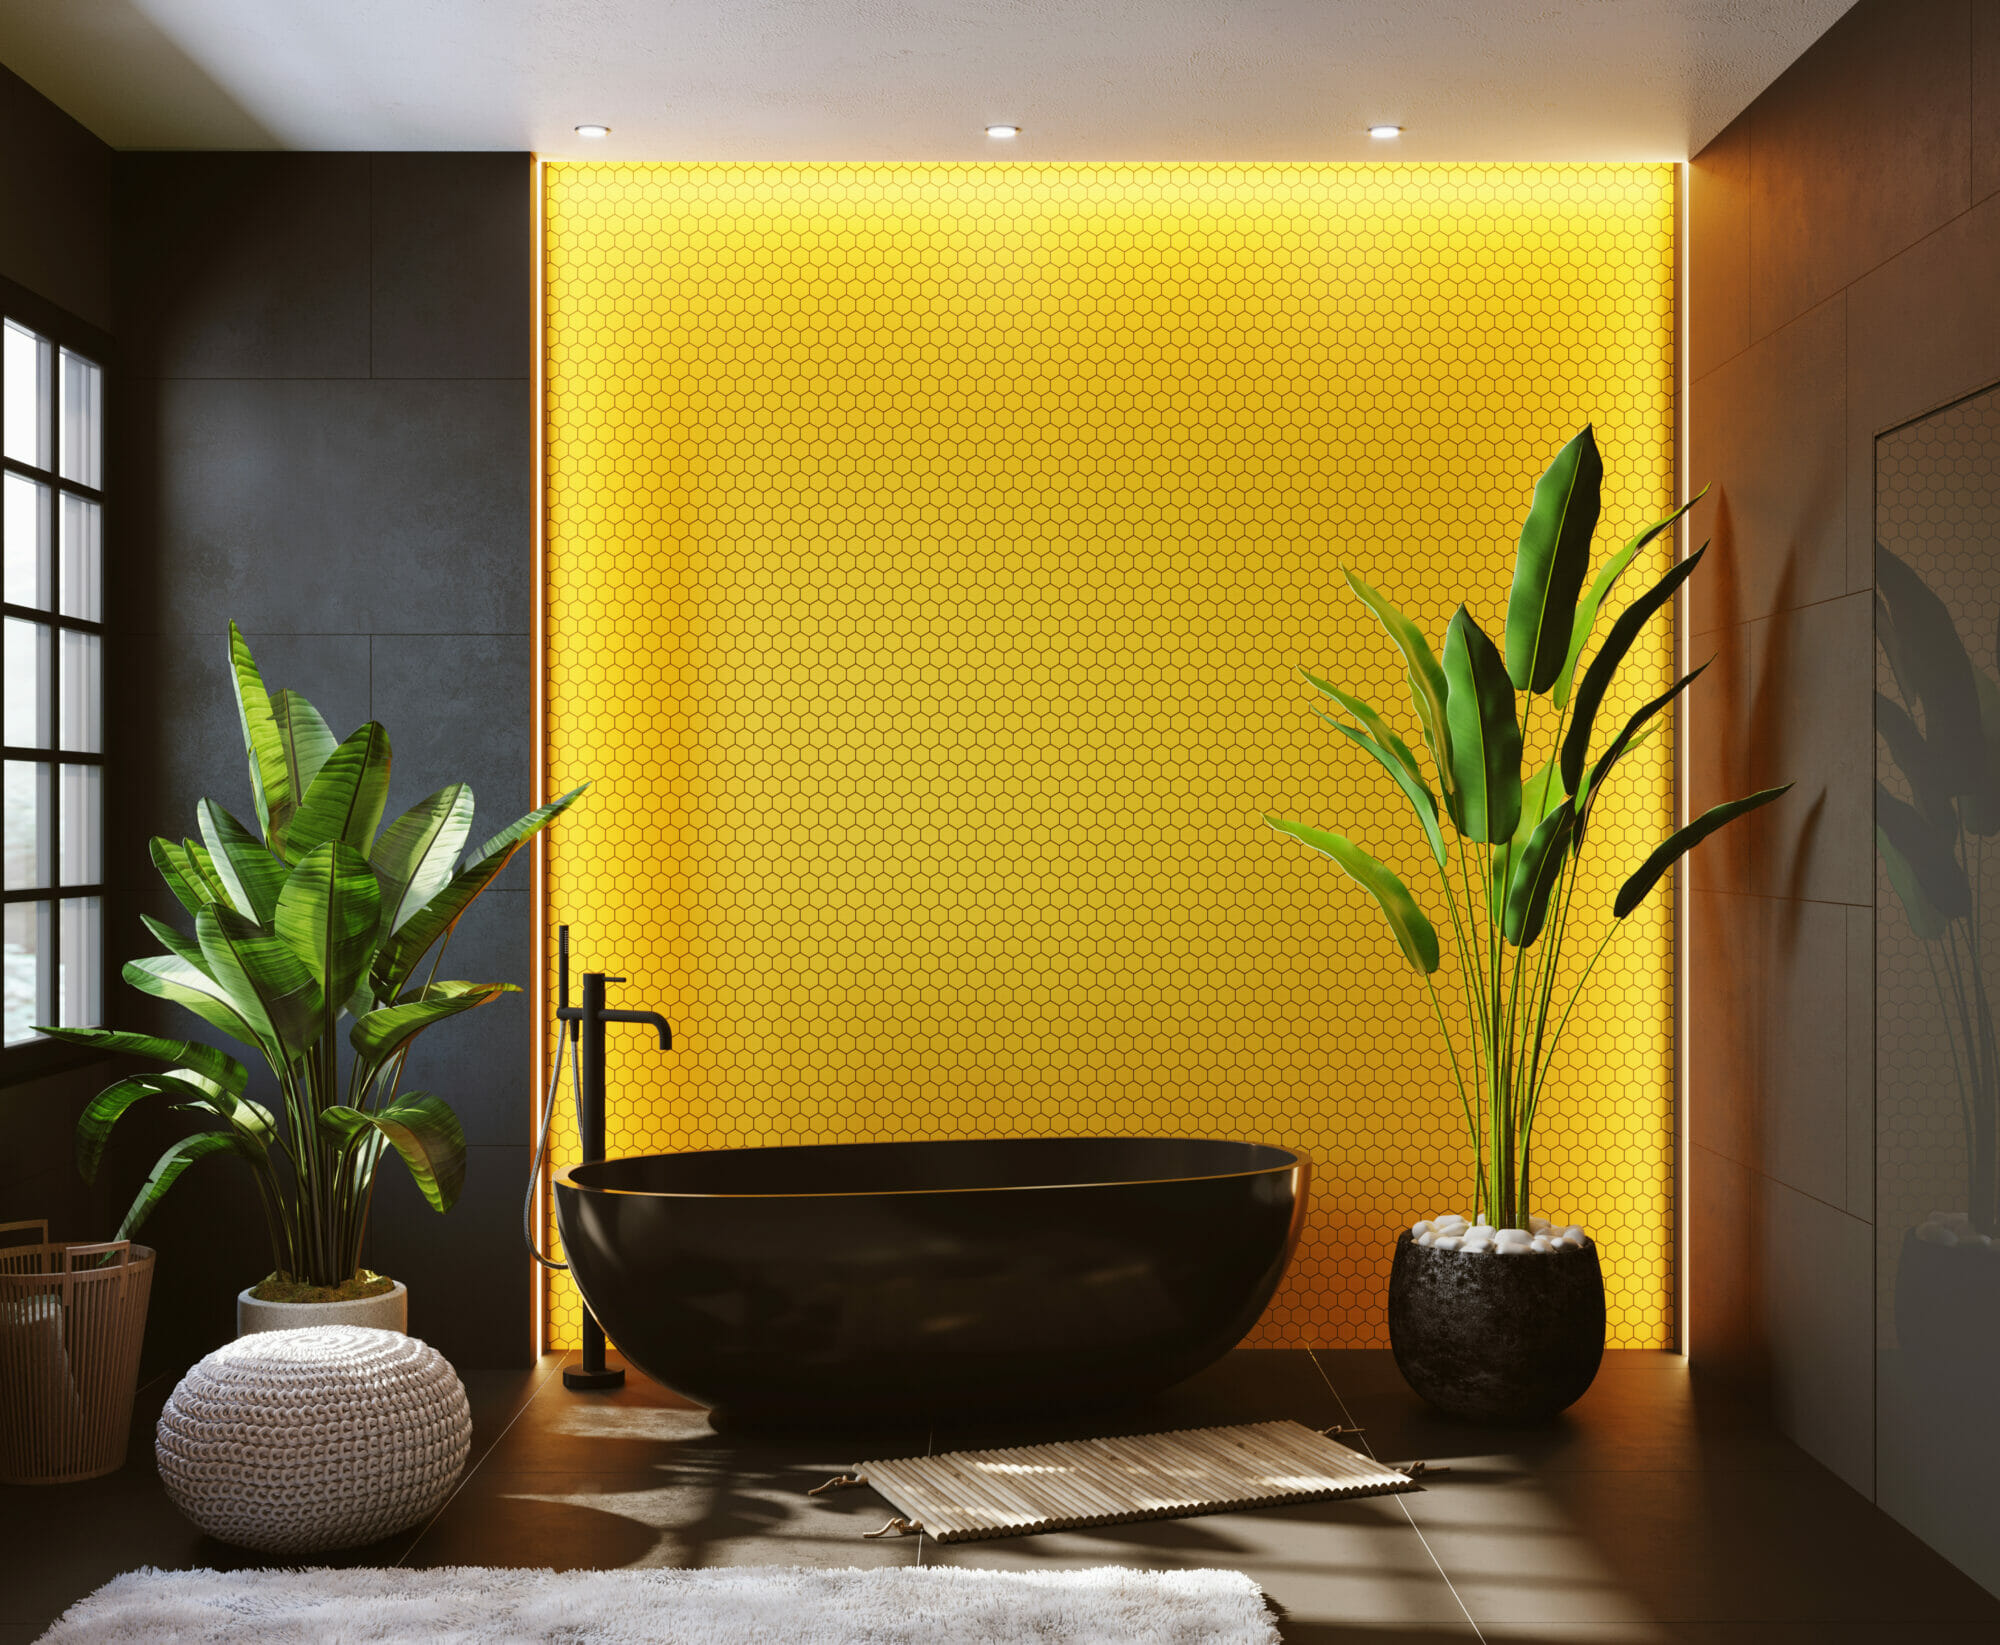 yellow honeycomb tiled wall with decor